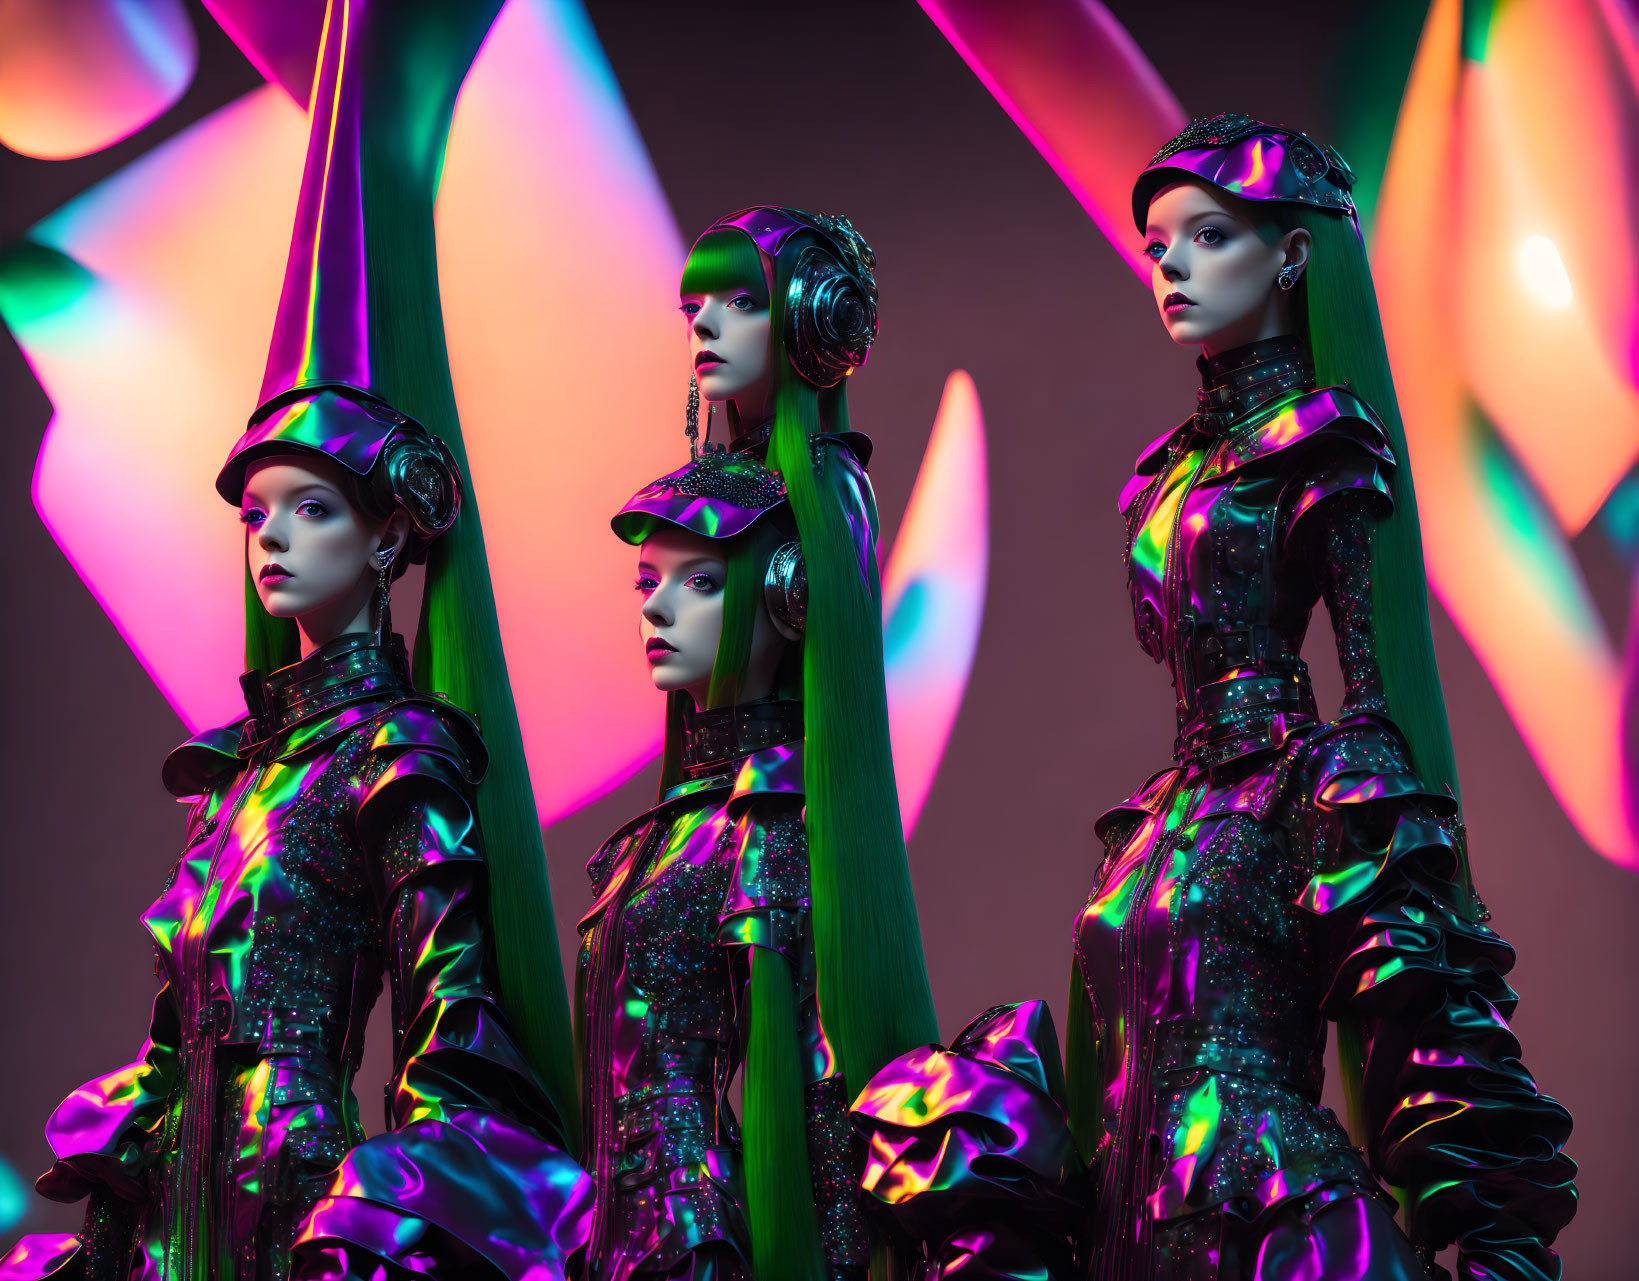 Four green-haired futuristic mannequins in metallic outfits on colorful abstract backdrop